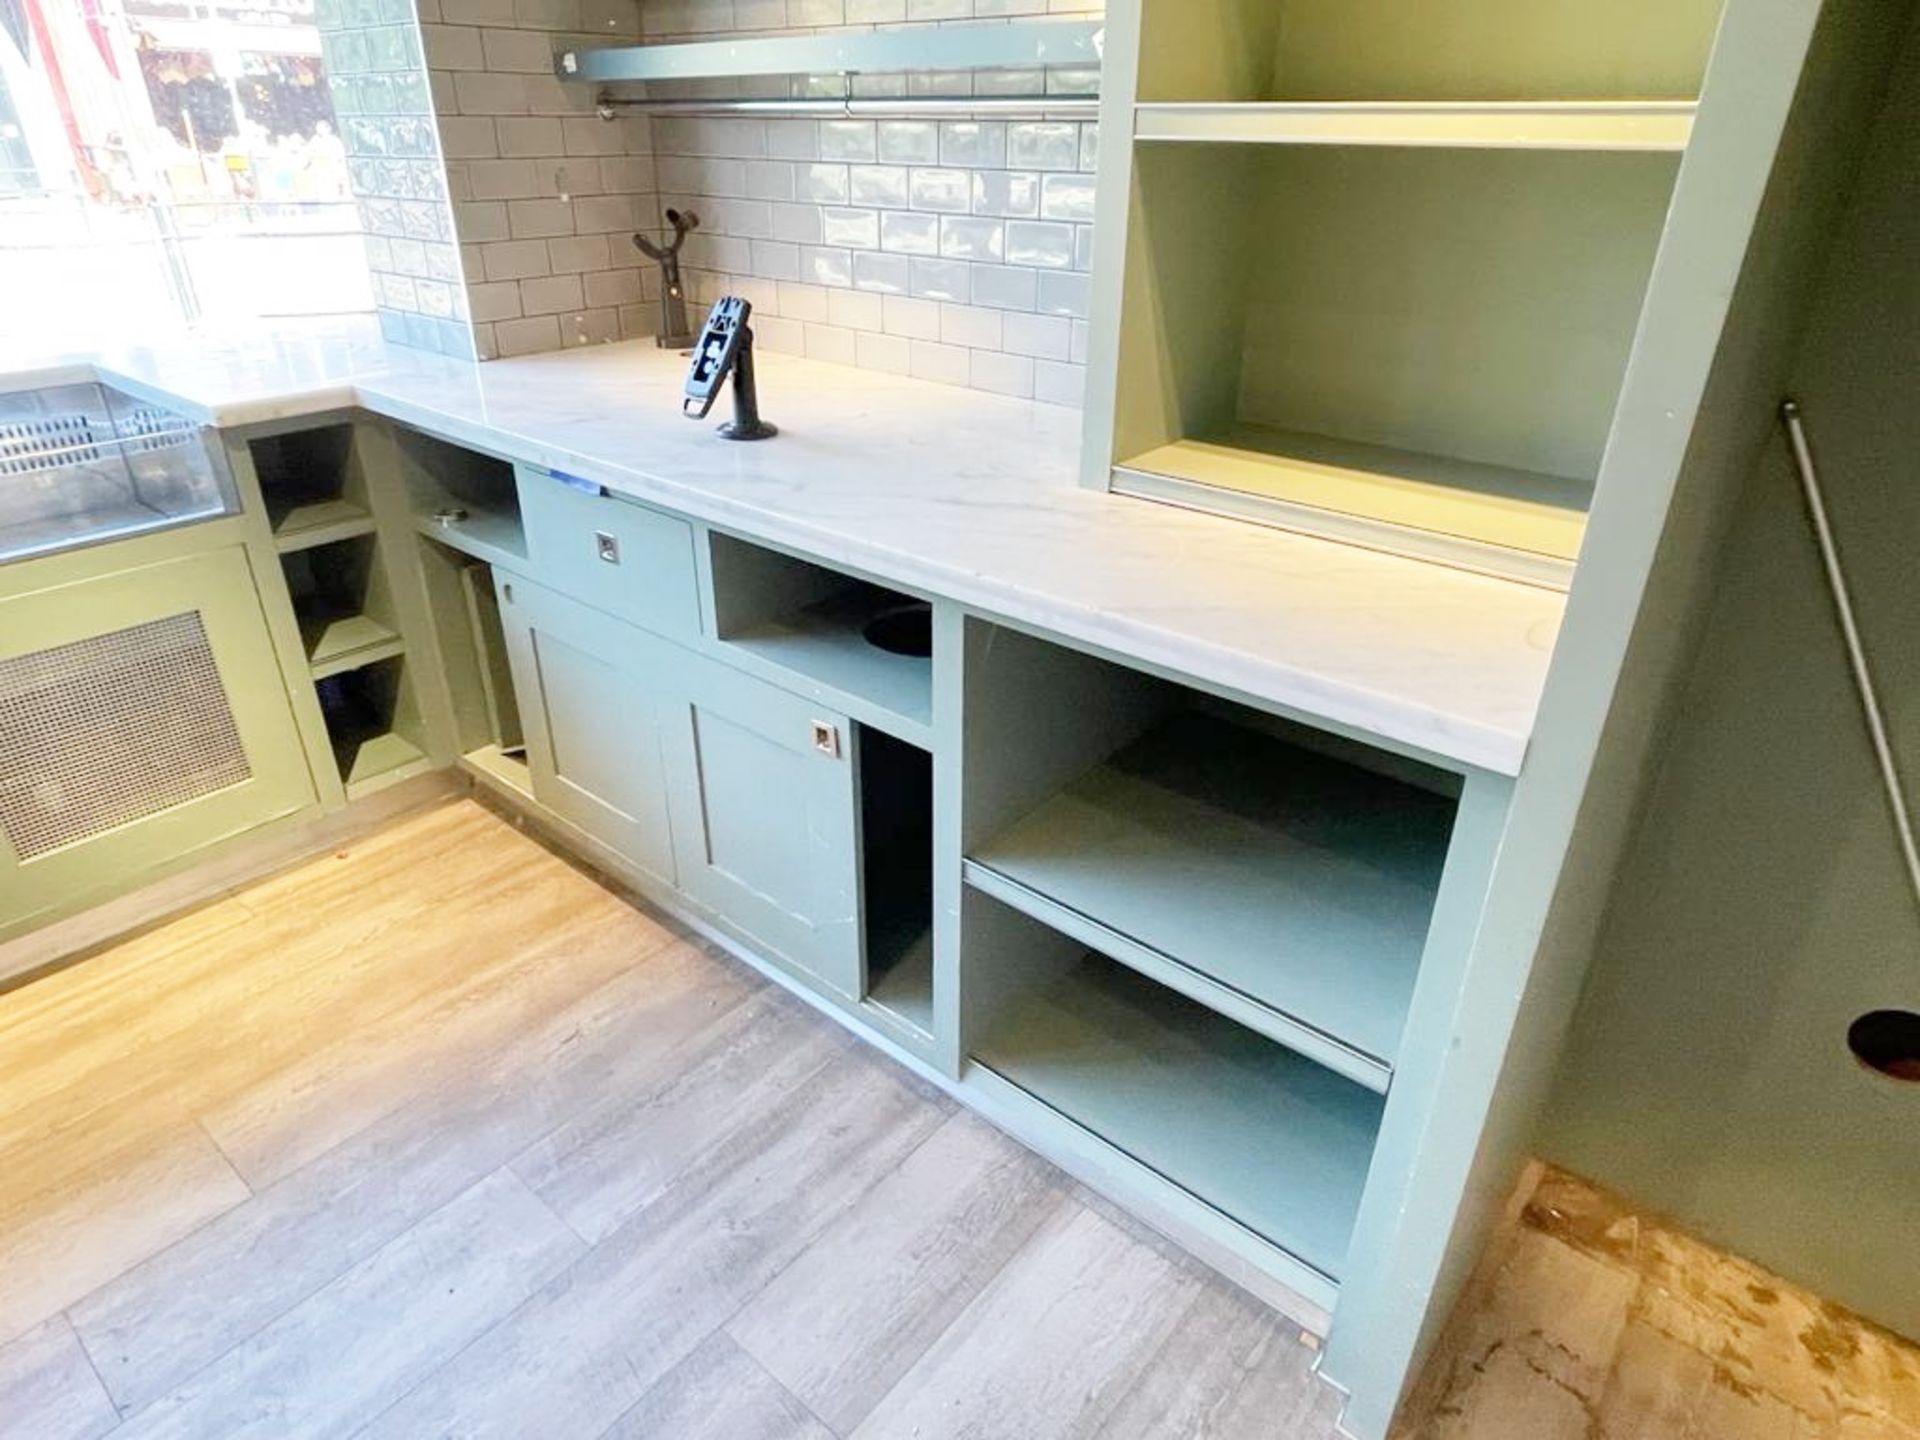 1 x Bespoke Storage Unit Painted in Light Green - Features Space For an Upright Drinks Cabinet, - Image 6 of 12